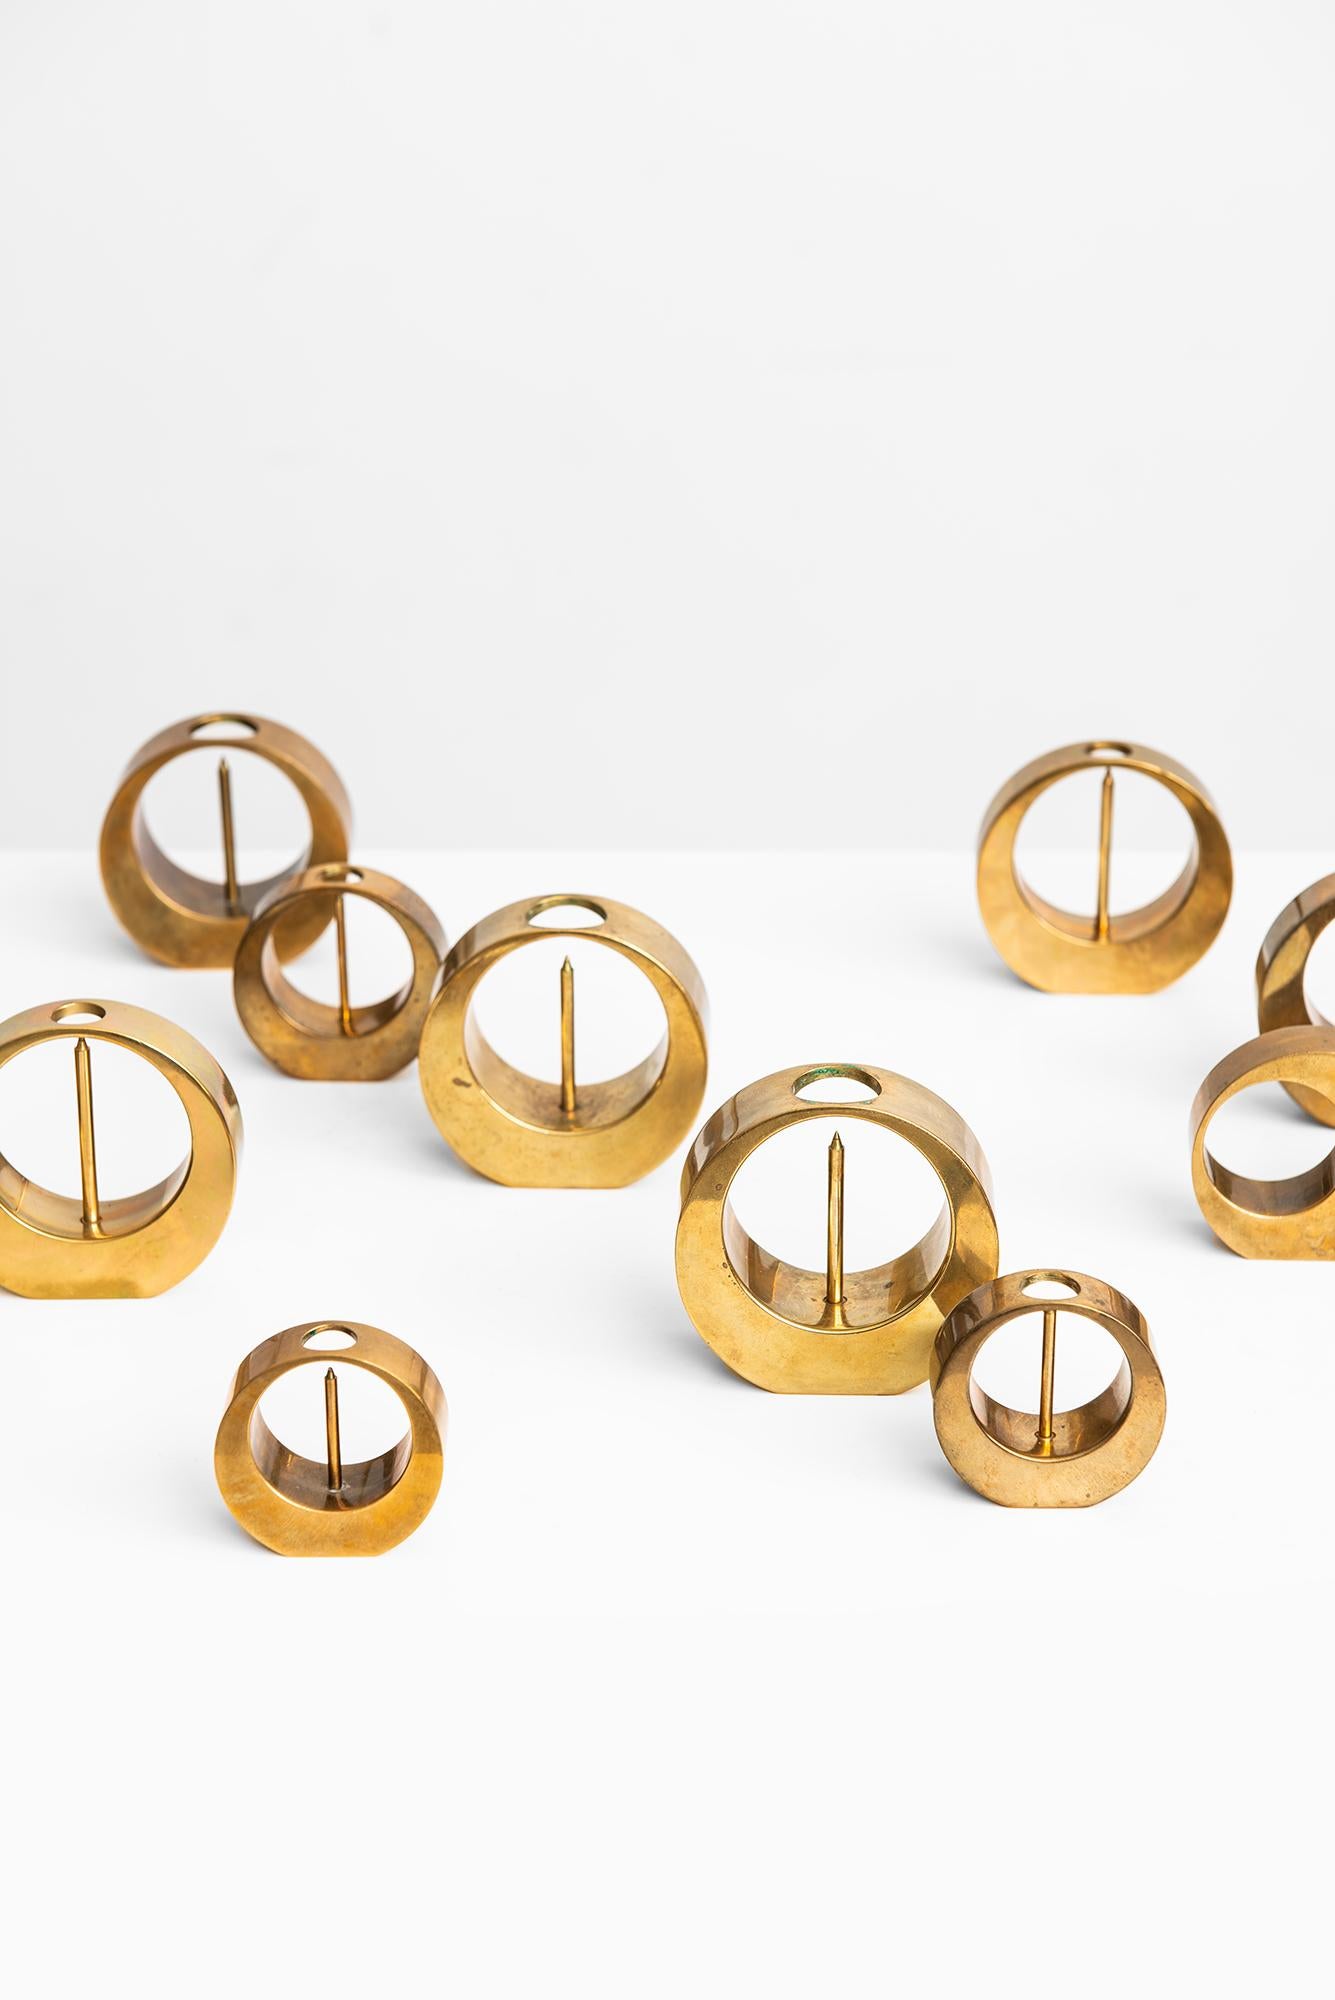 Set of 10 candlesticks designed by Arthur Pe. Produced in his own studio Kolbäck in Sweden.